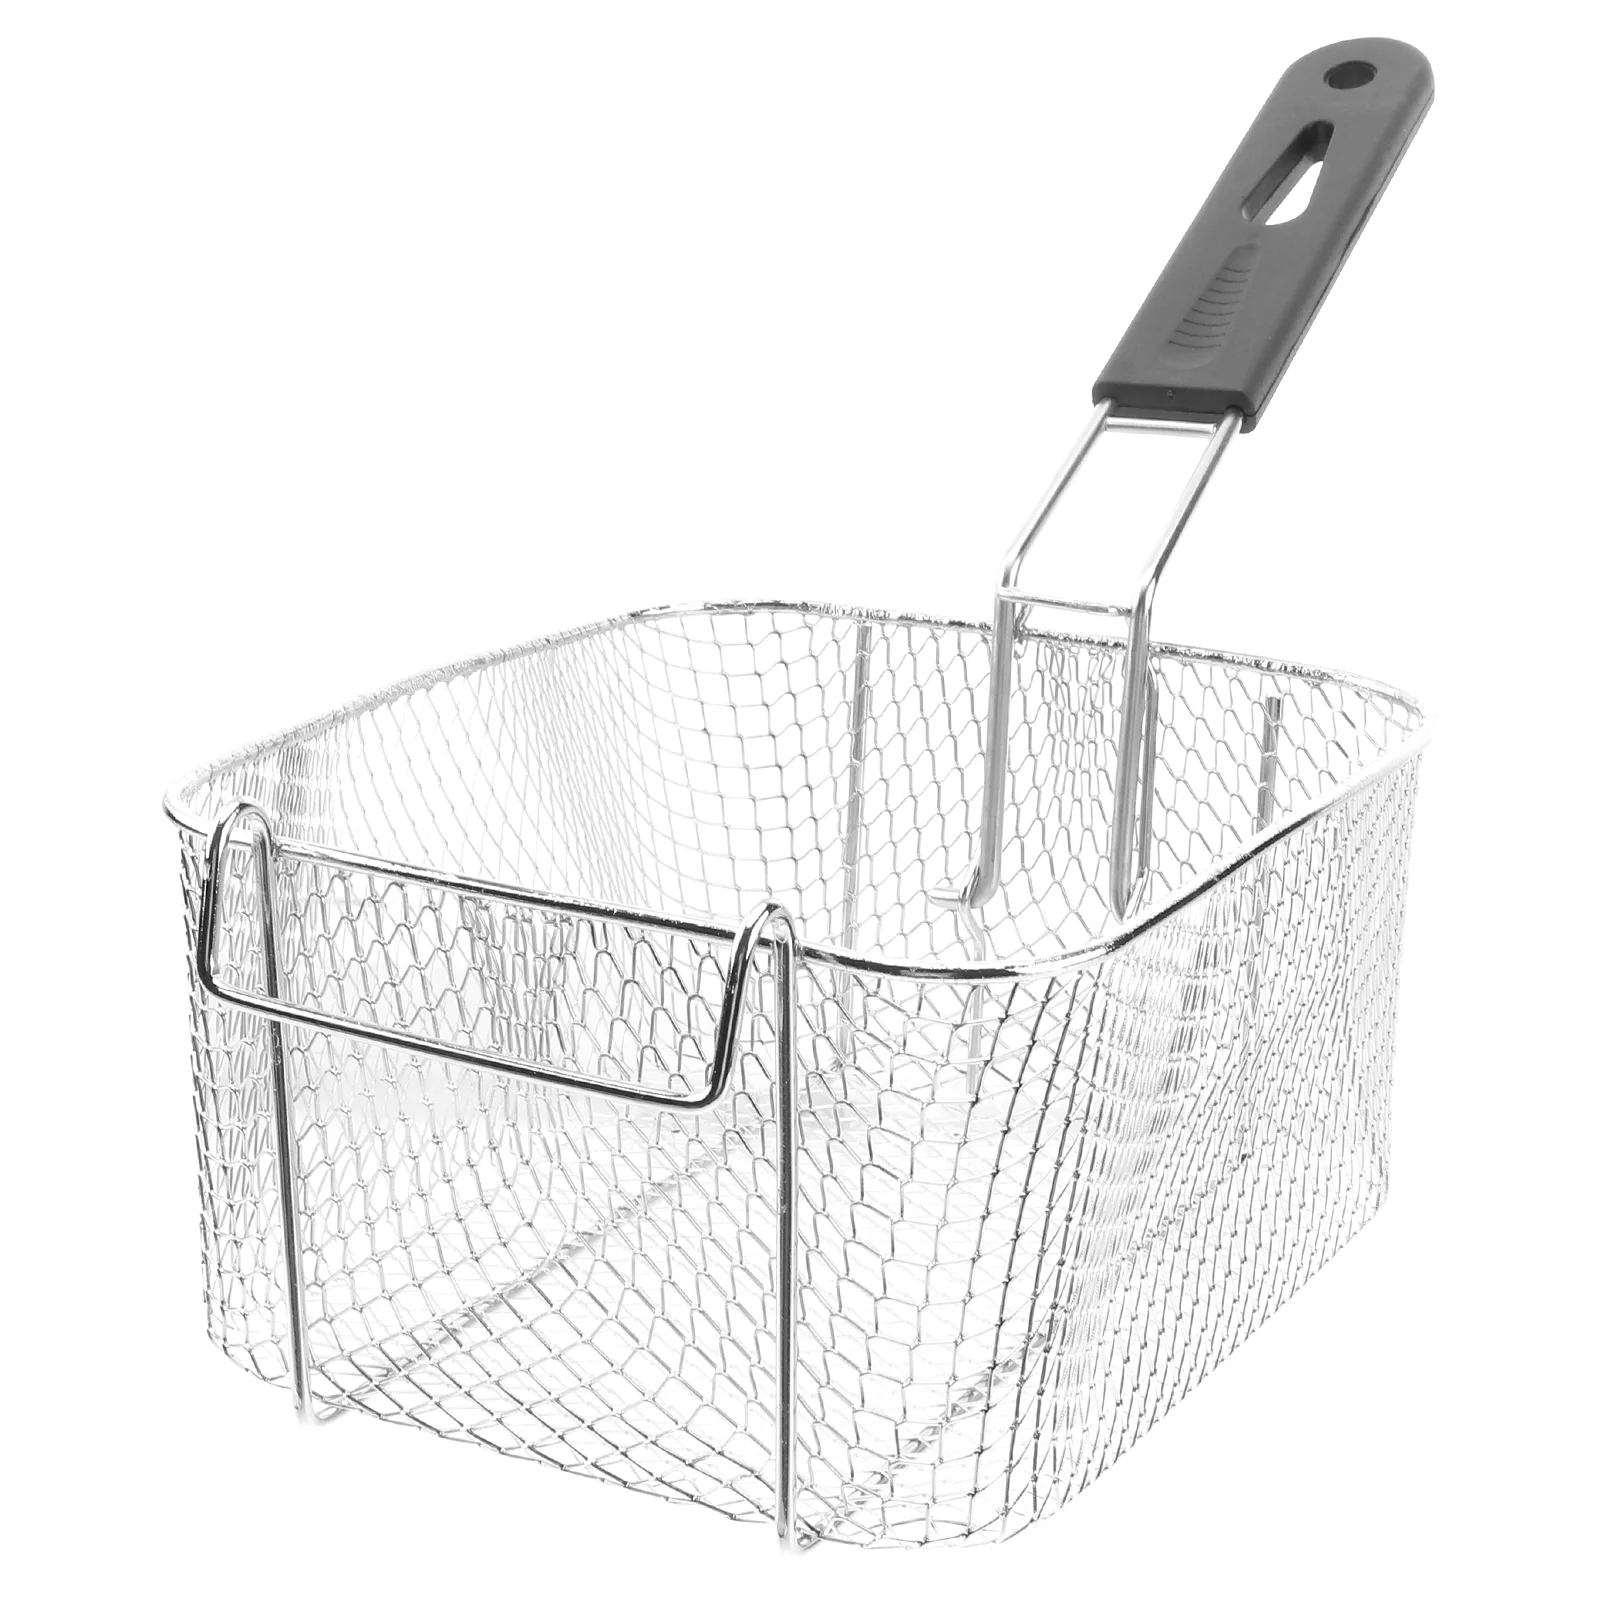 

Stainless Steel Deep Fry Basket Wire Mesh Strainer with Long Handle Frying Cooking Tool Food Presentation Tableware (Silver)